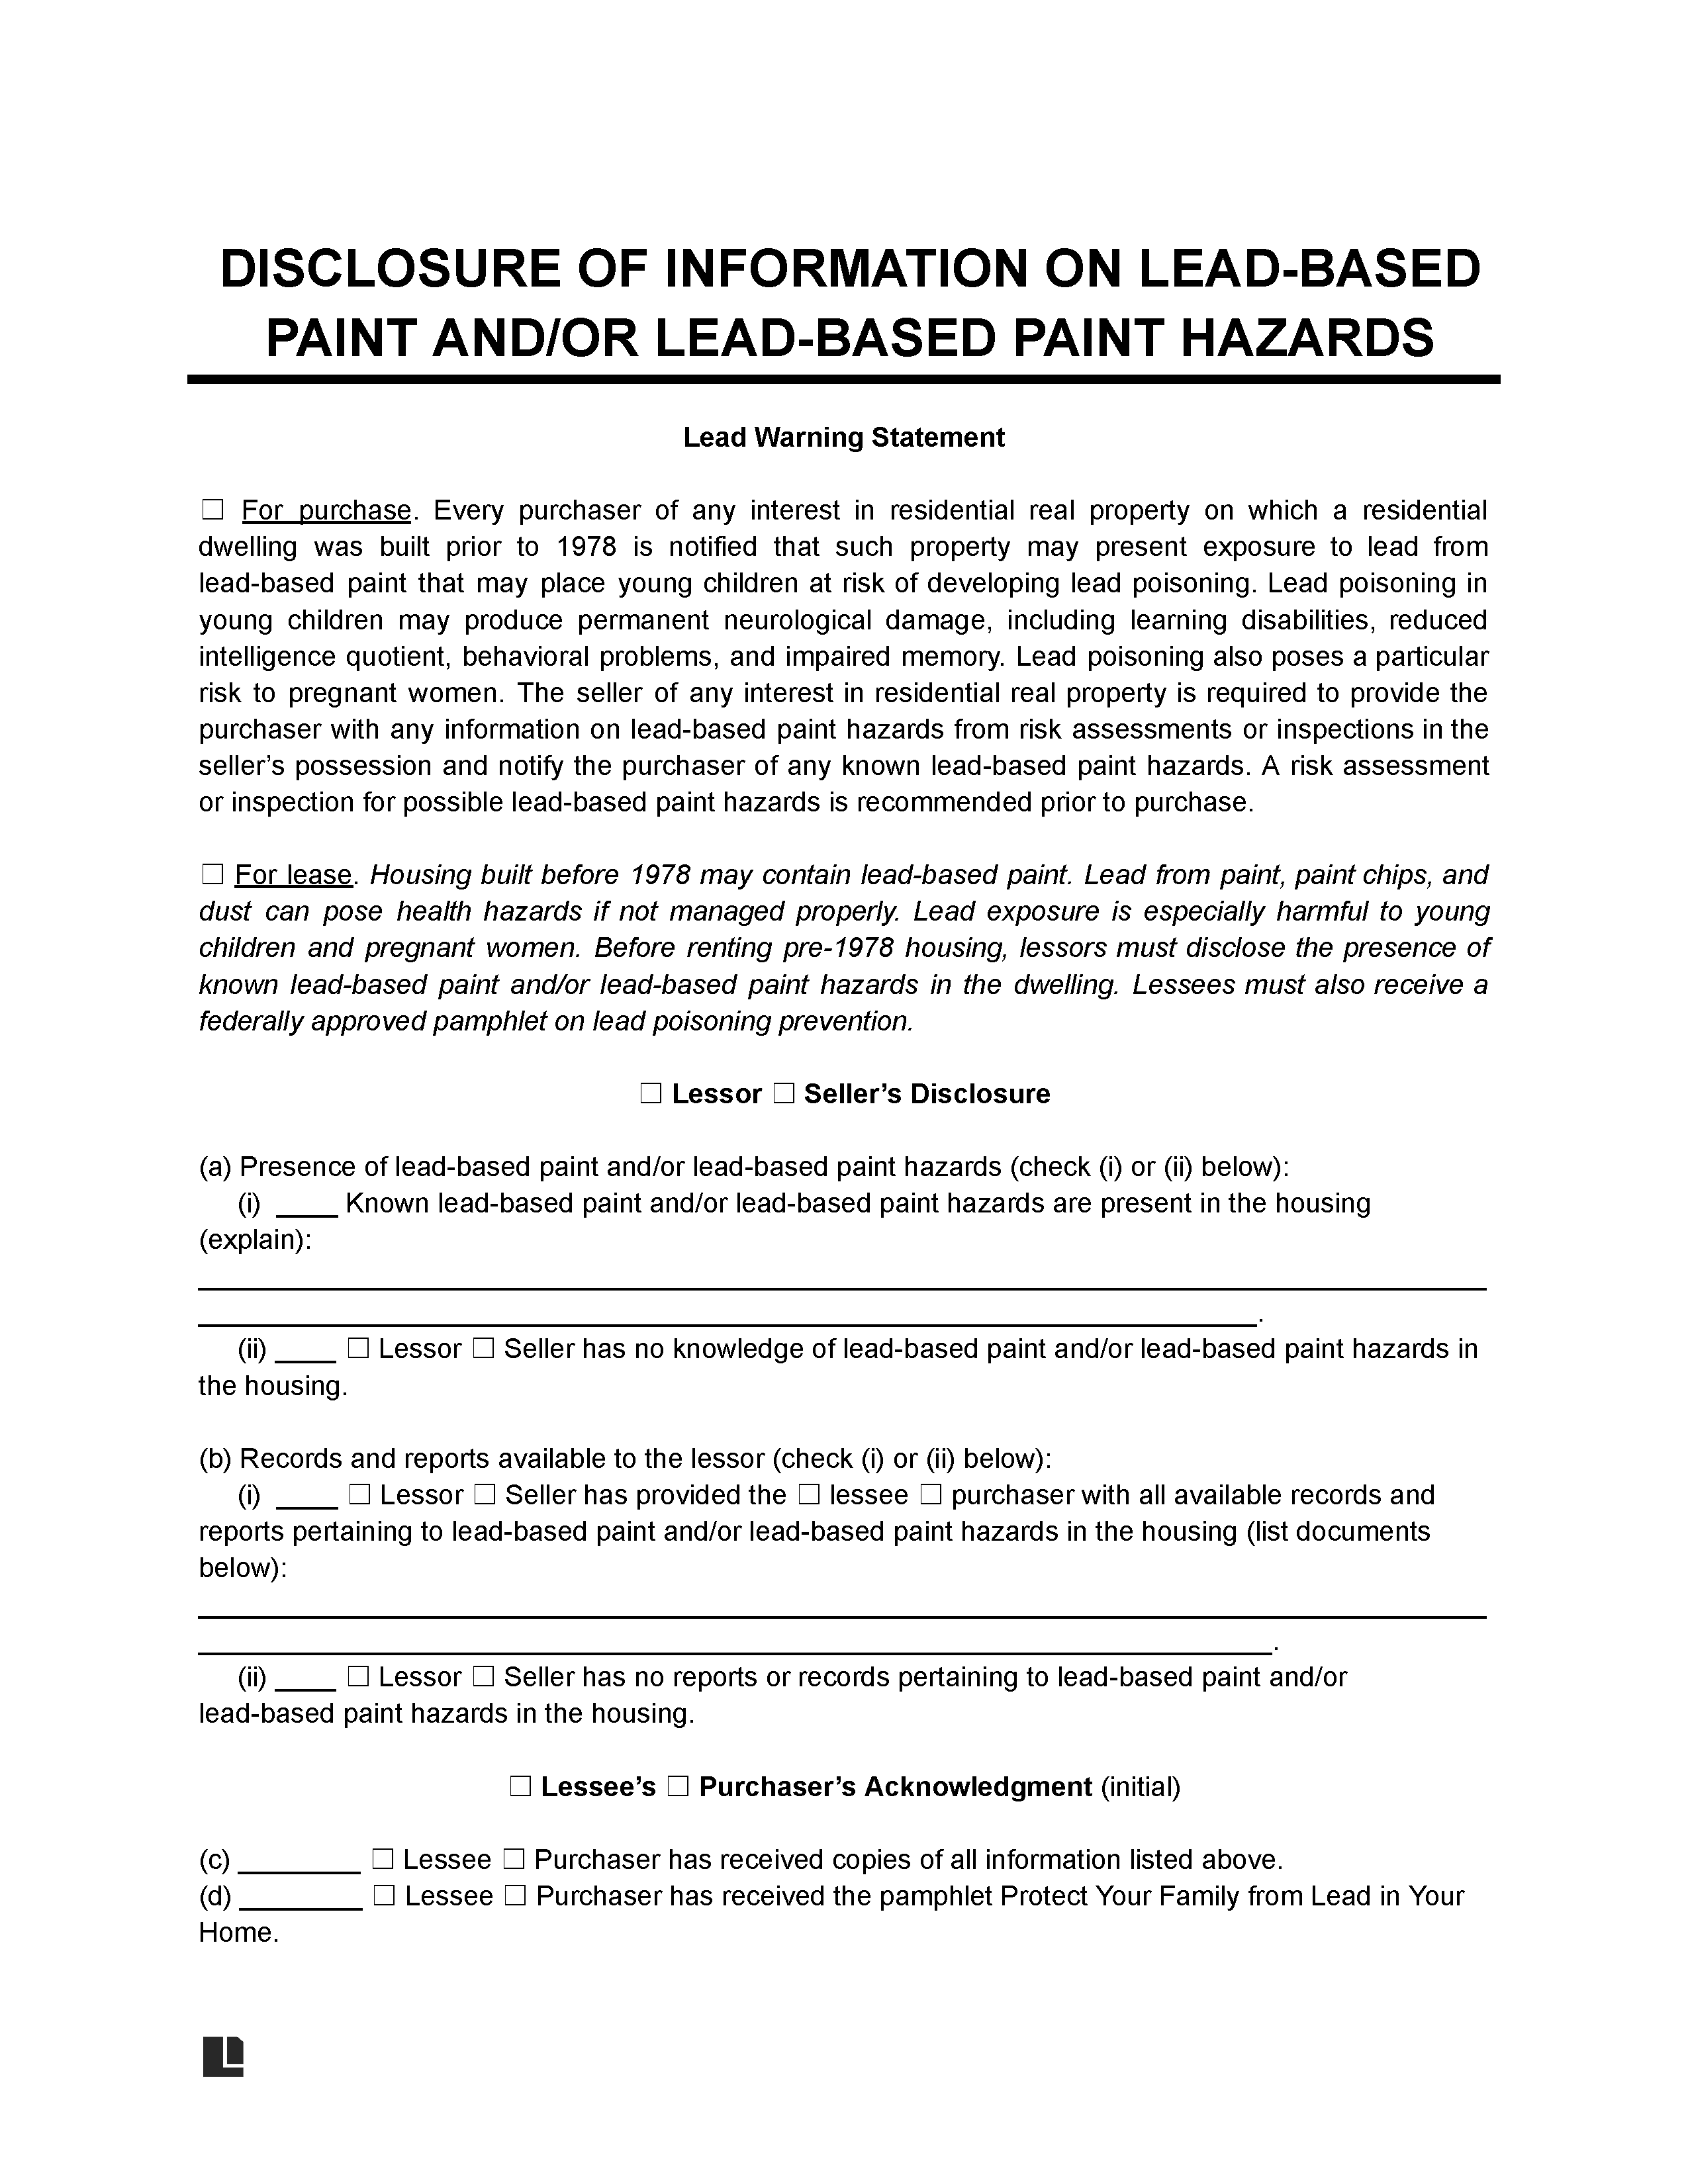 lead-based paint disclosure template